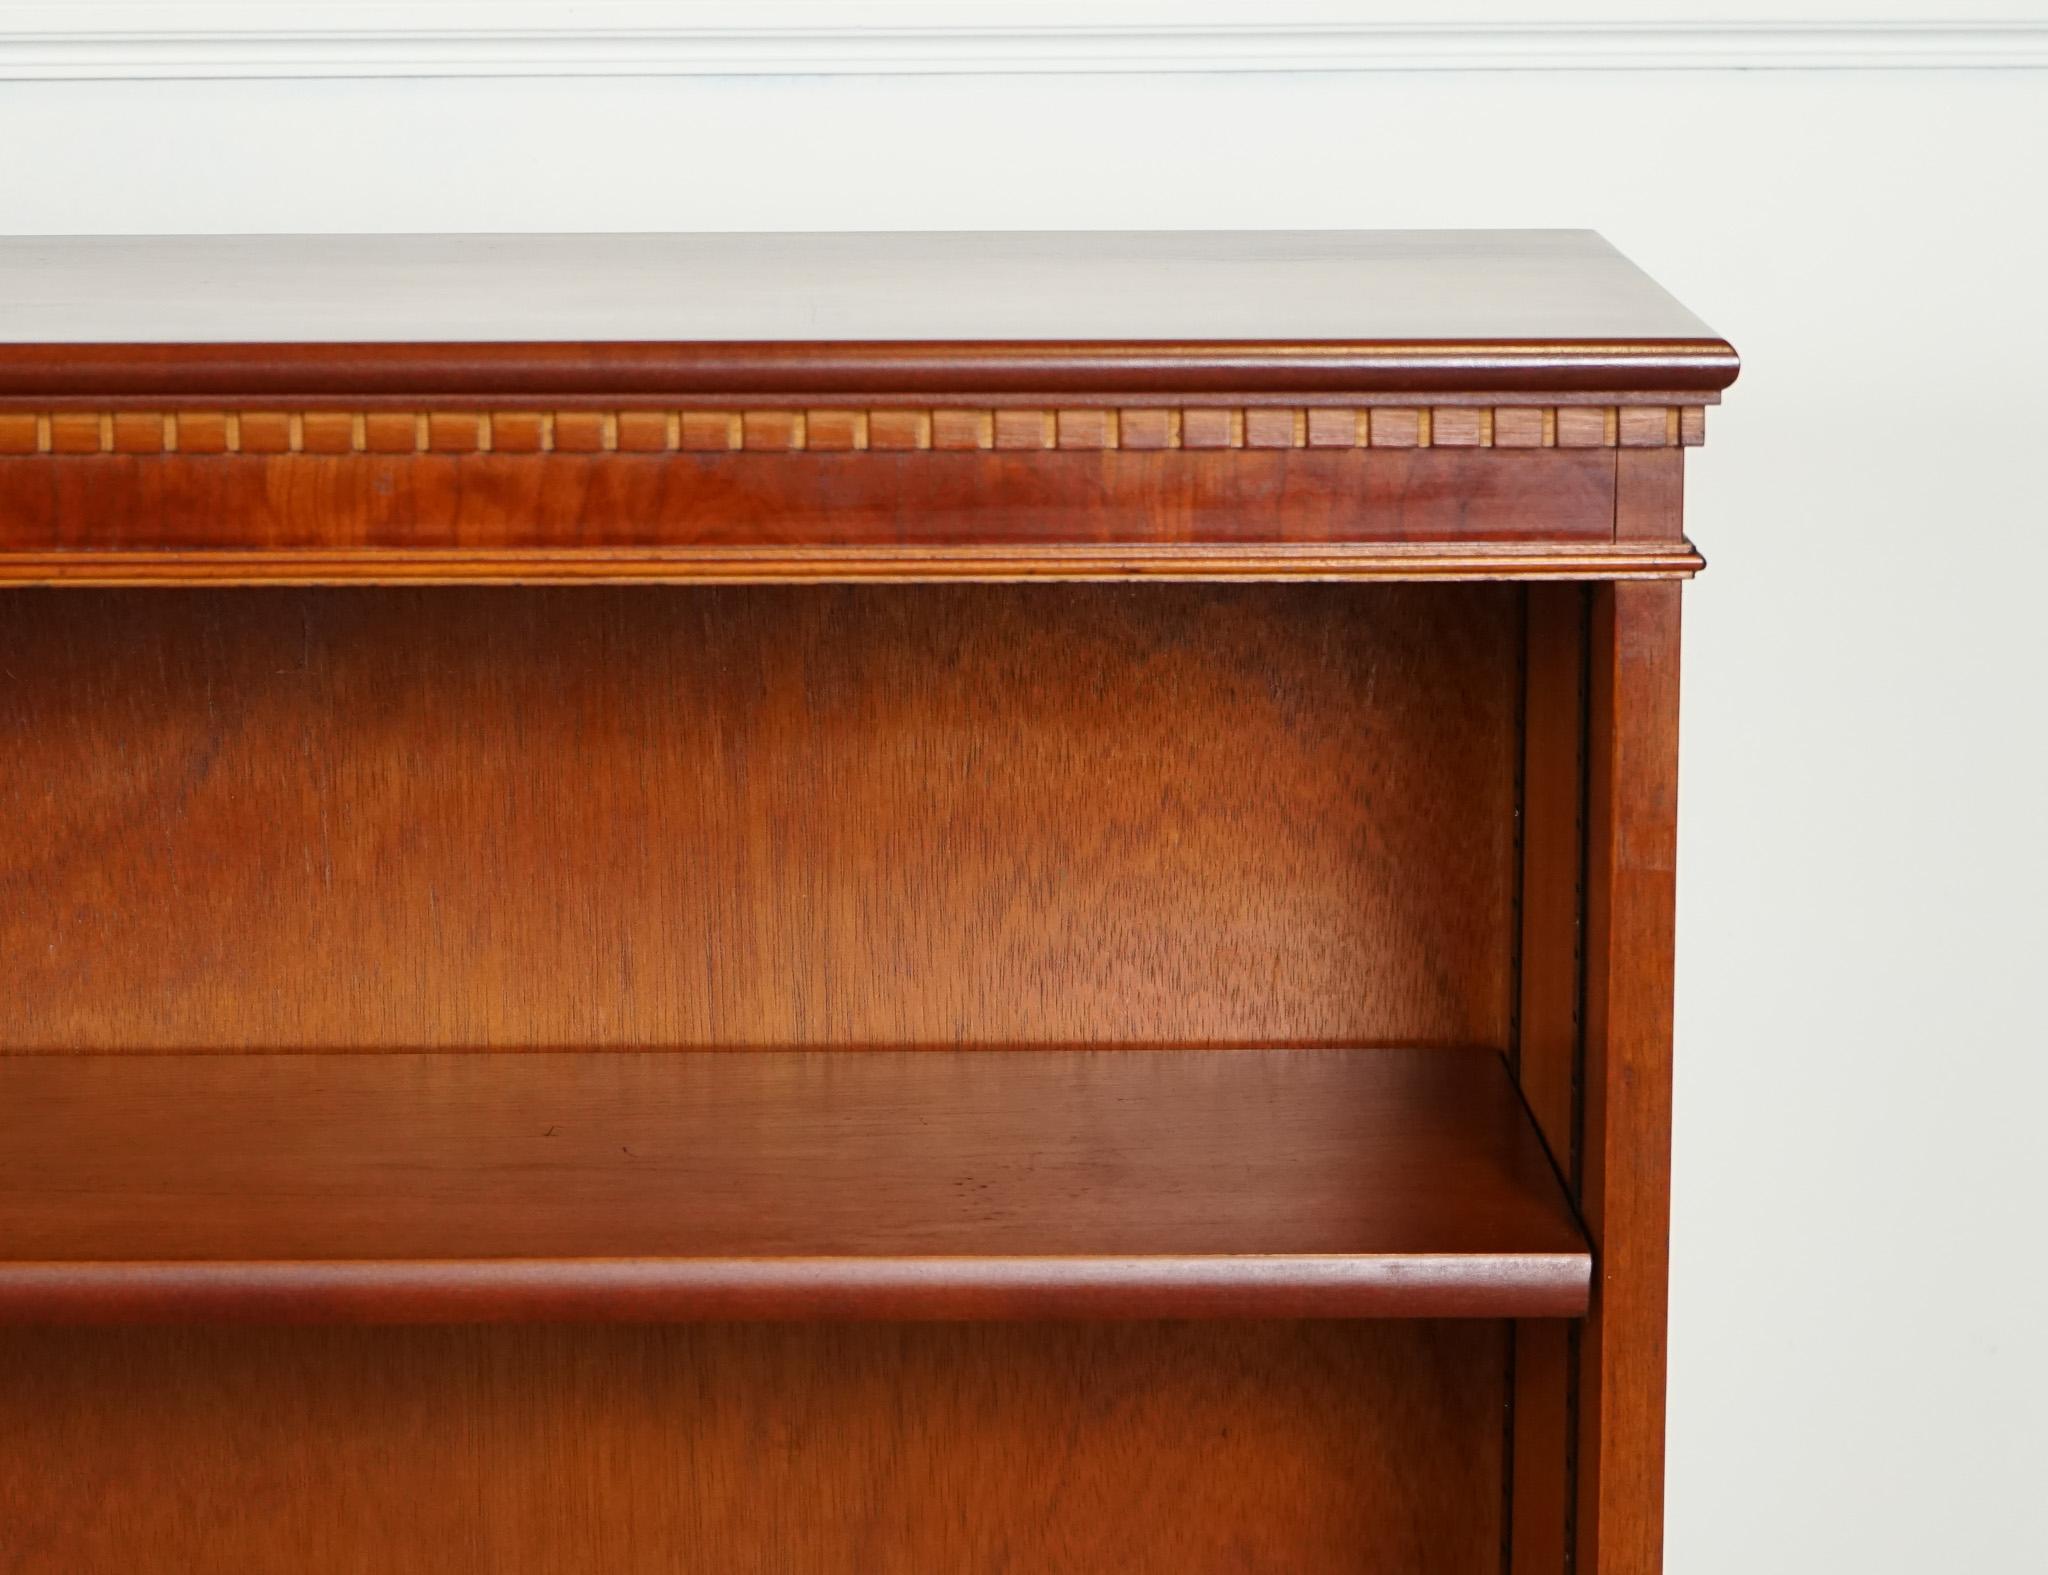 VINTAGE YEW DOUBLE FRONTED LOW OPEN BOOKCASE WiTH ADJUSTABLE SHELVES In Good Condition For Sale In Pulborough, GB